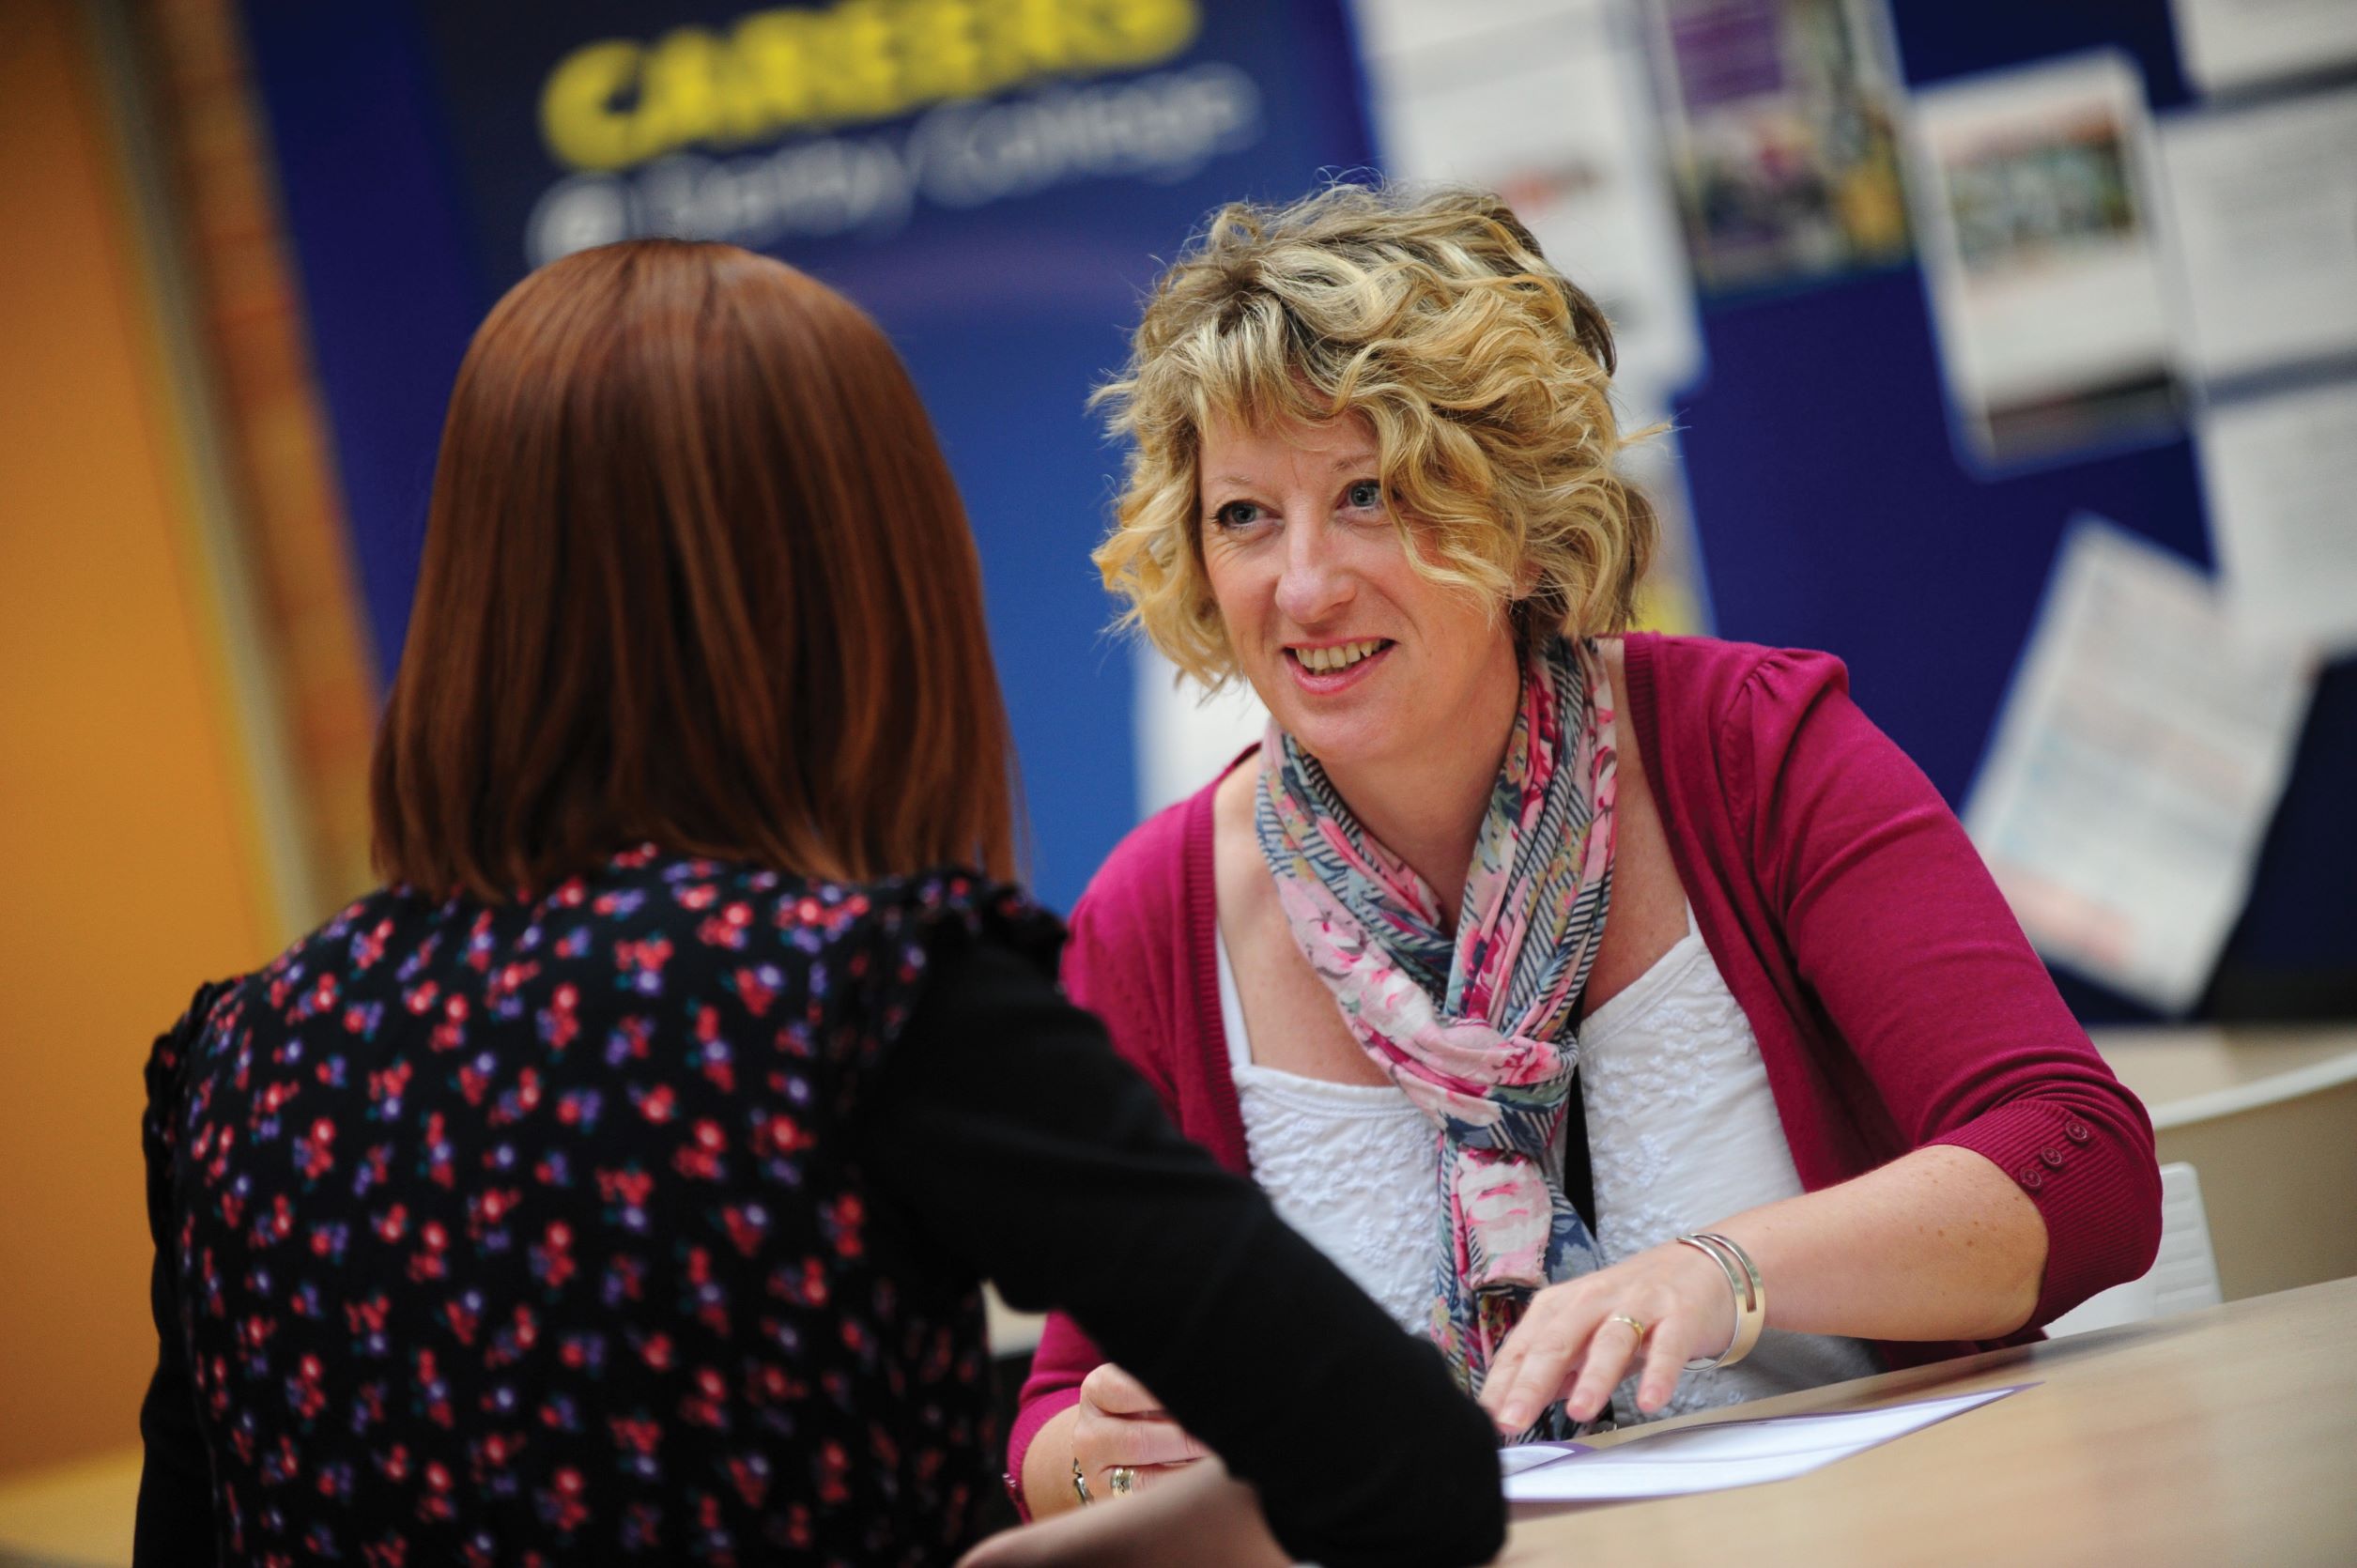 Female careers advisor talking to a student.